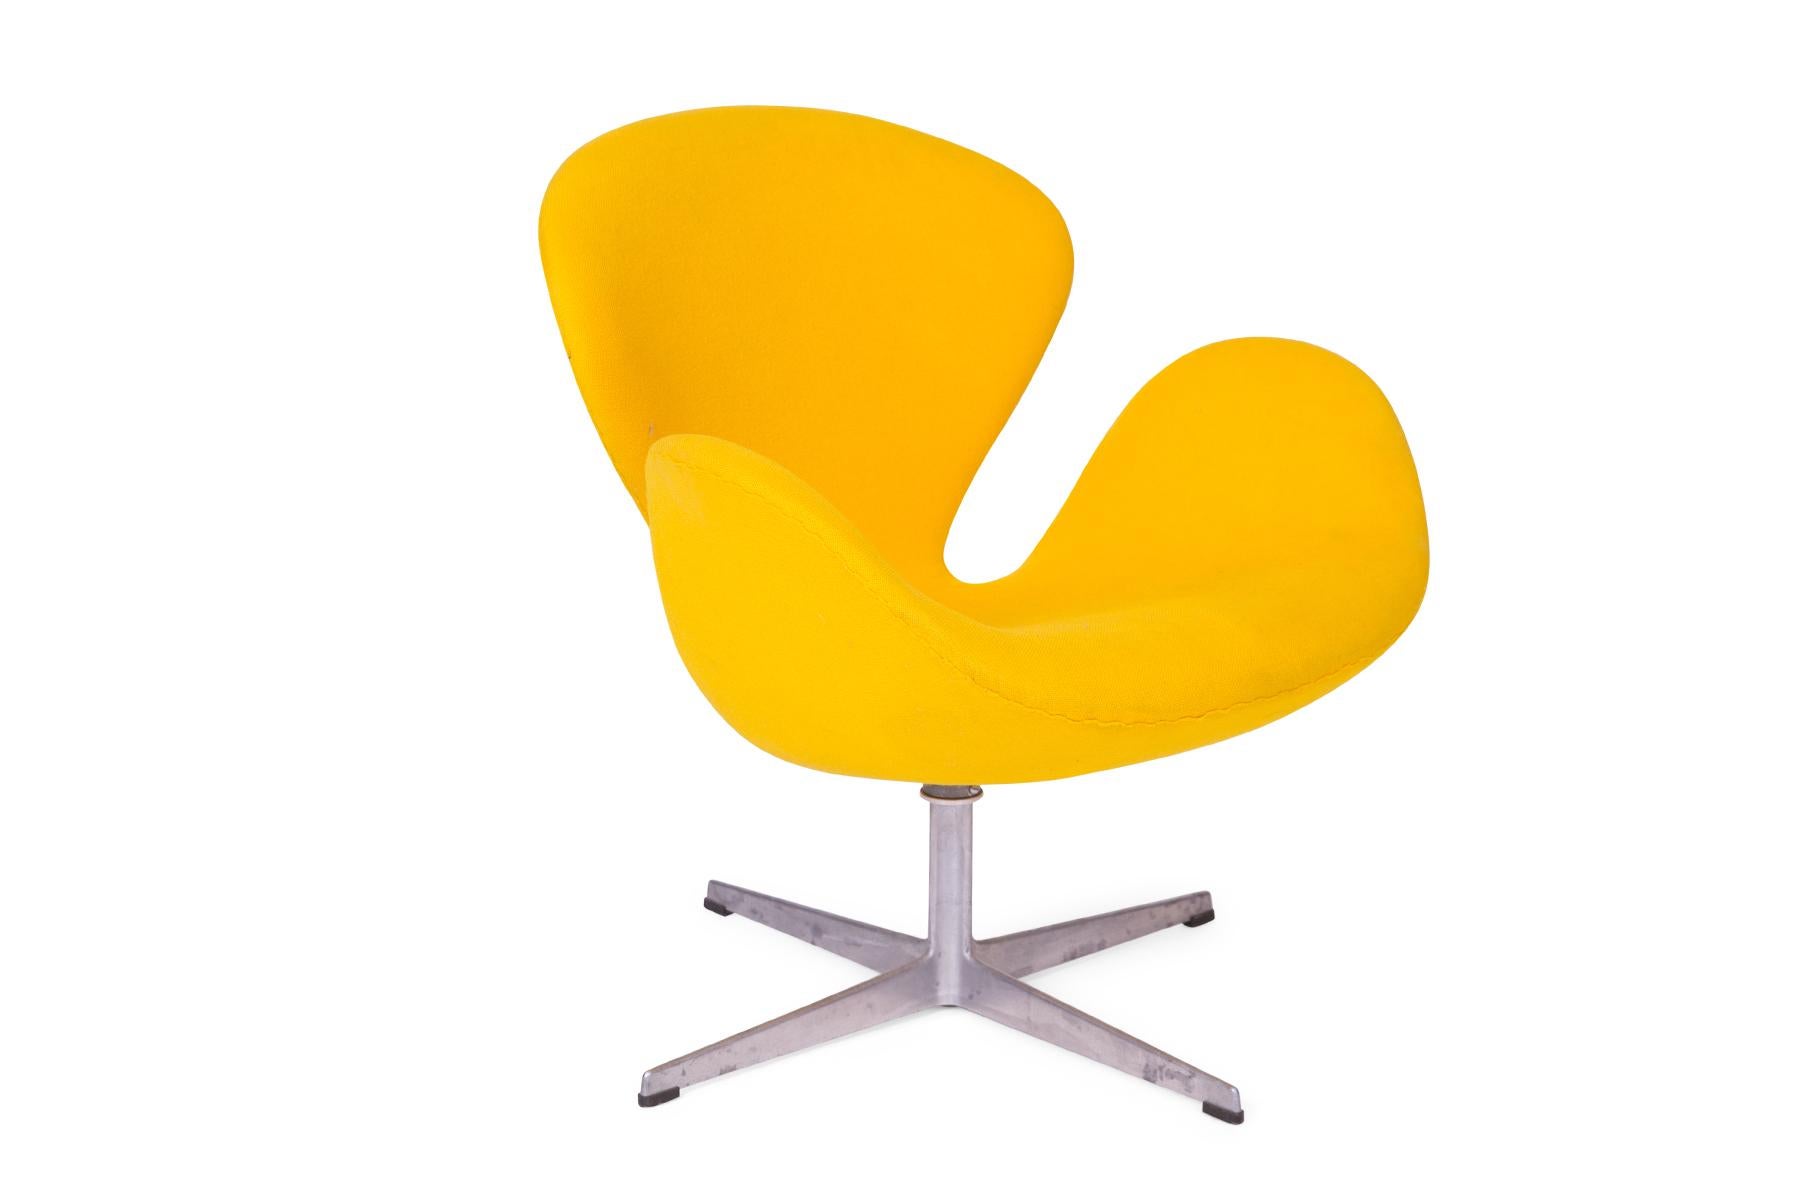 Arne Jacobsen for Fritz Hansen all original swan chair, circa early 1960s. This example is upholstered in its original lemon yellow that has only light age appropriate wear. Foam is in excellent condition.